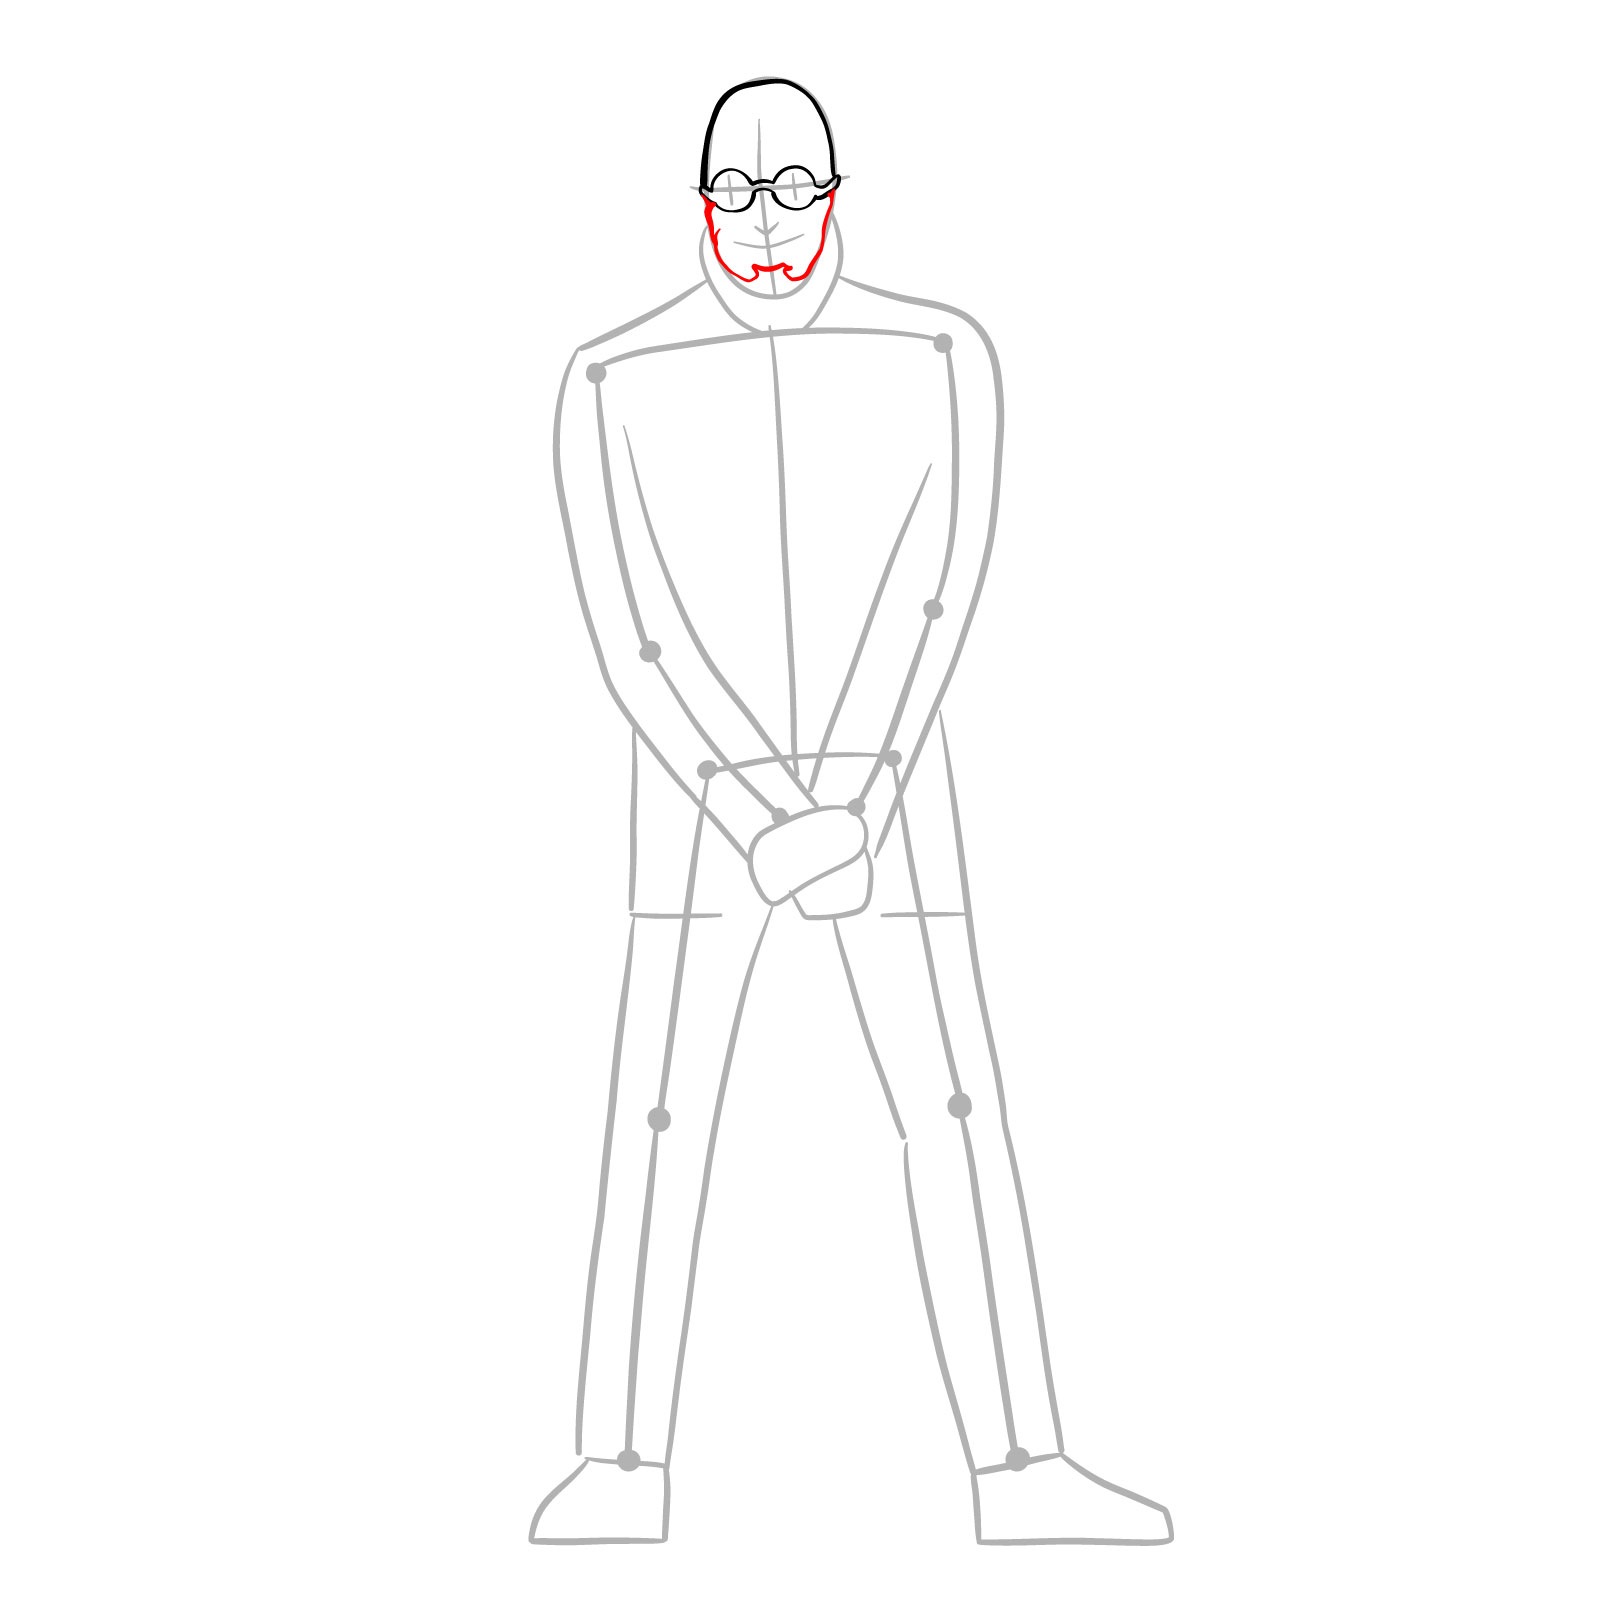 How to draw Dr. Hugo Strange from DC Comics - step 06